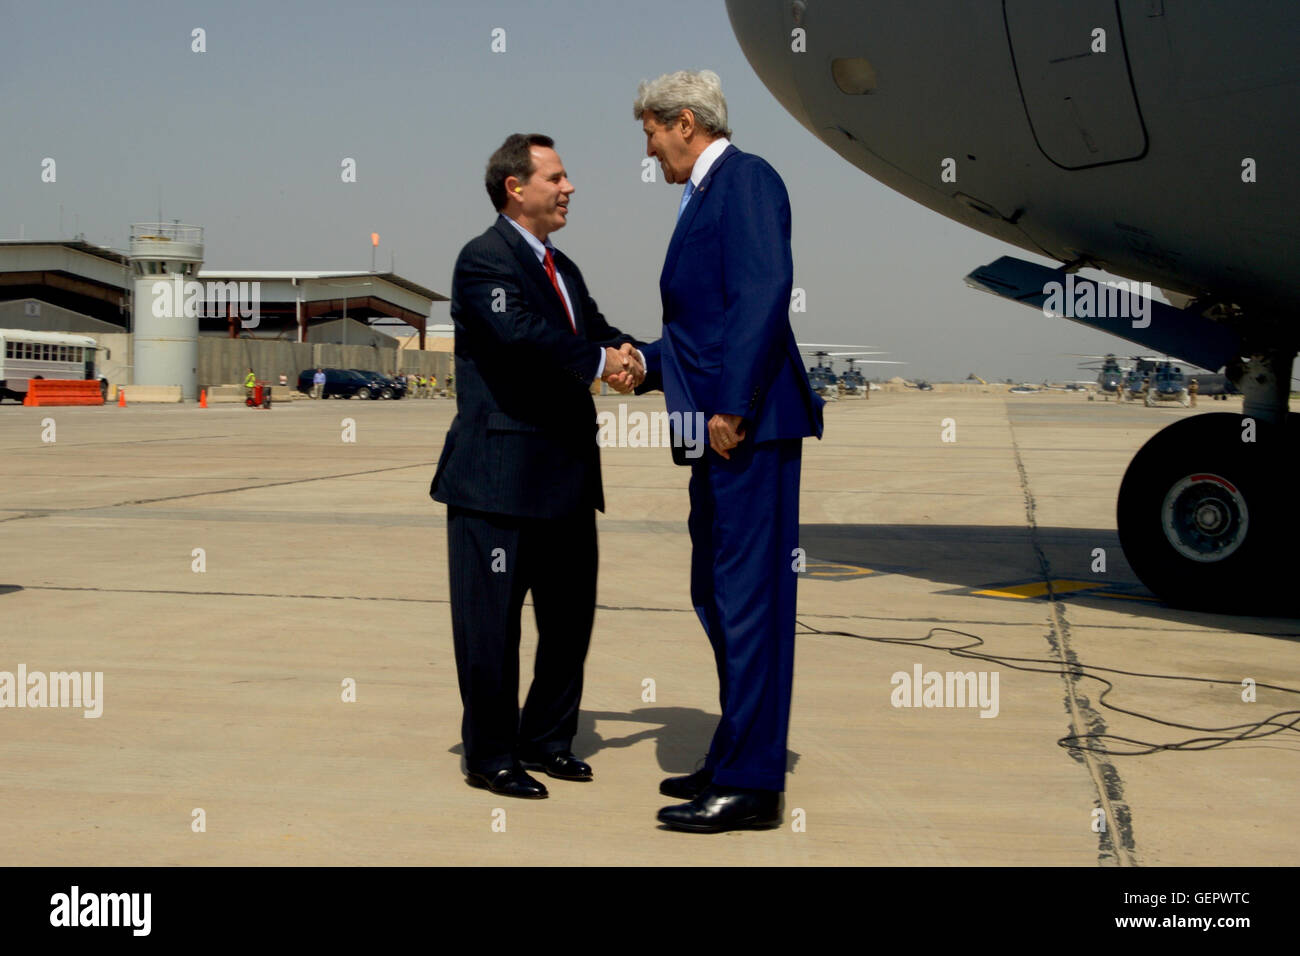 Secretary Kerry Shakes Hands With U.S. Ambassador to Iraq Jones After Disembarking From a C-17 Aircraft Upon Landing in Baghdad Stock Photo